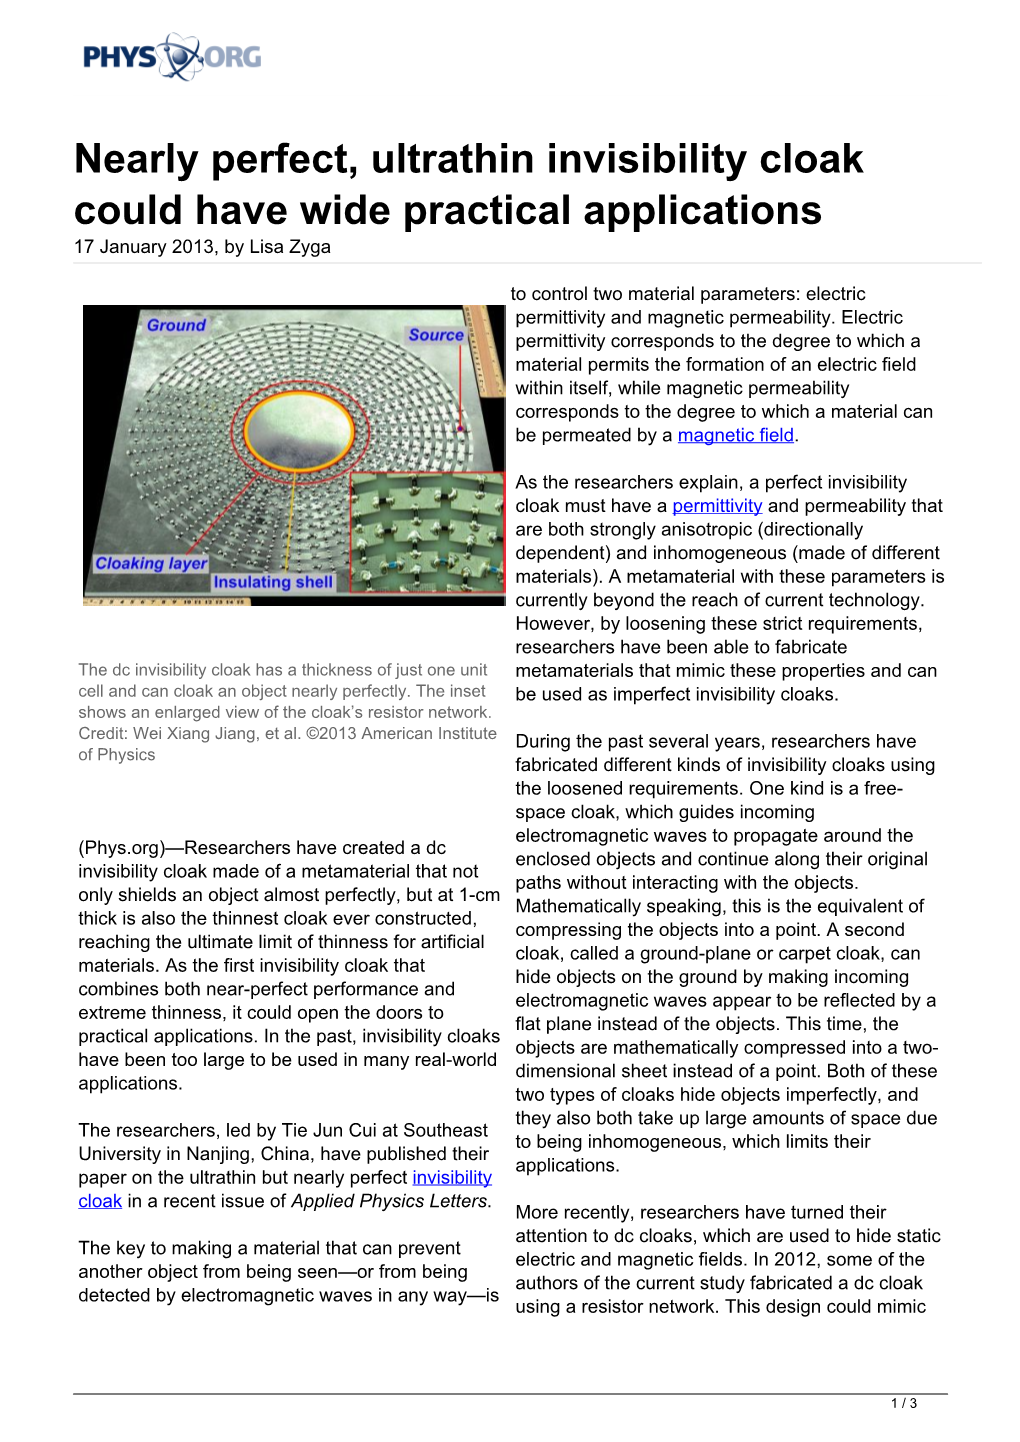 Nearly Perfect, Ultrathin Invisibility Cloak Could Have Wide Practical Applications 17 January 2013, by Lisa Zyga